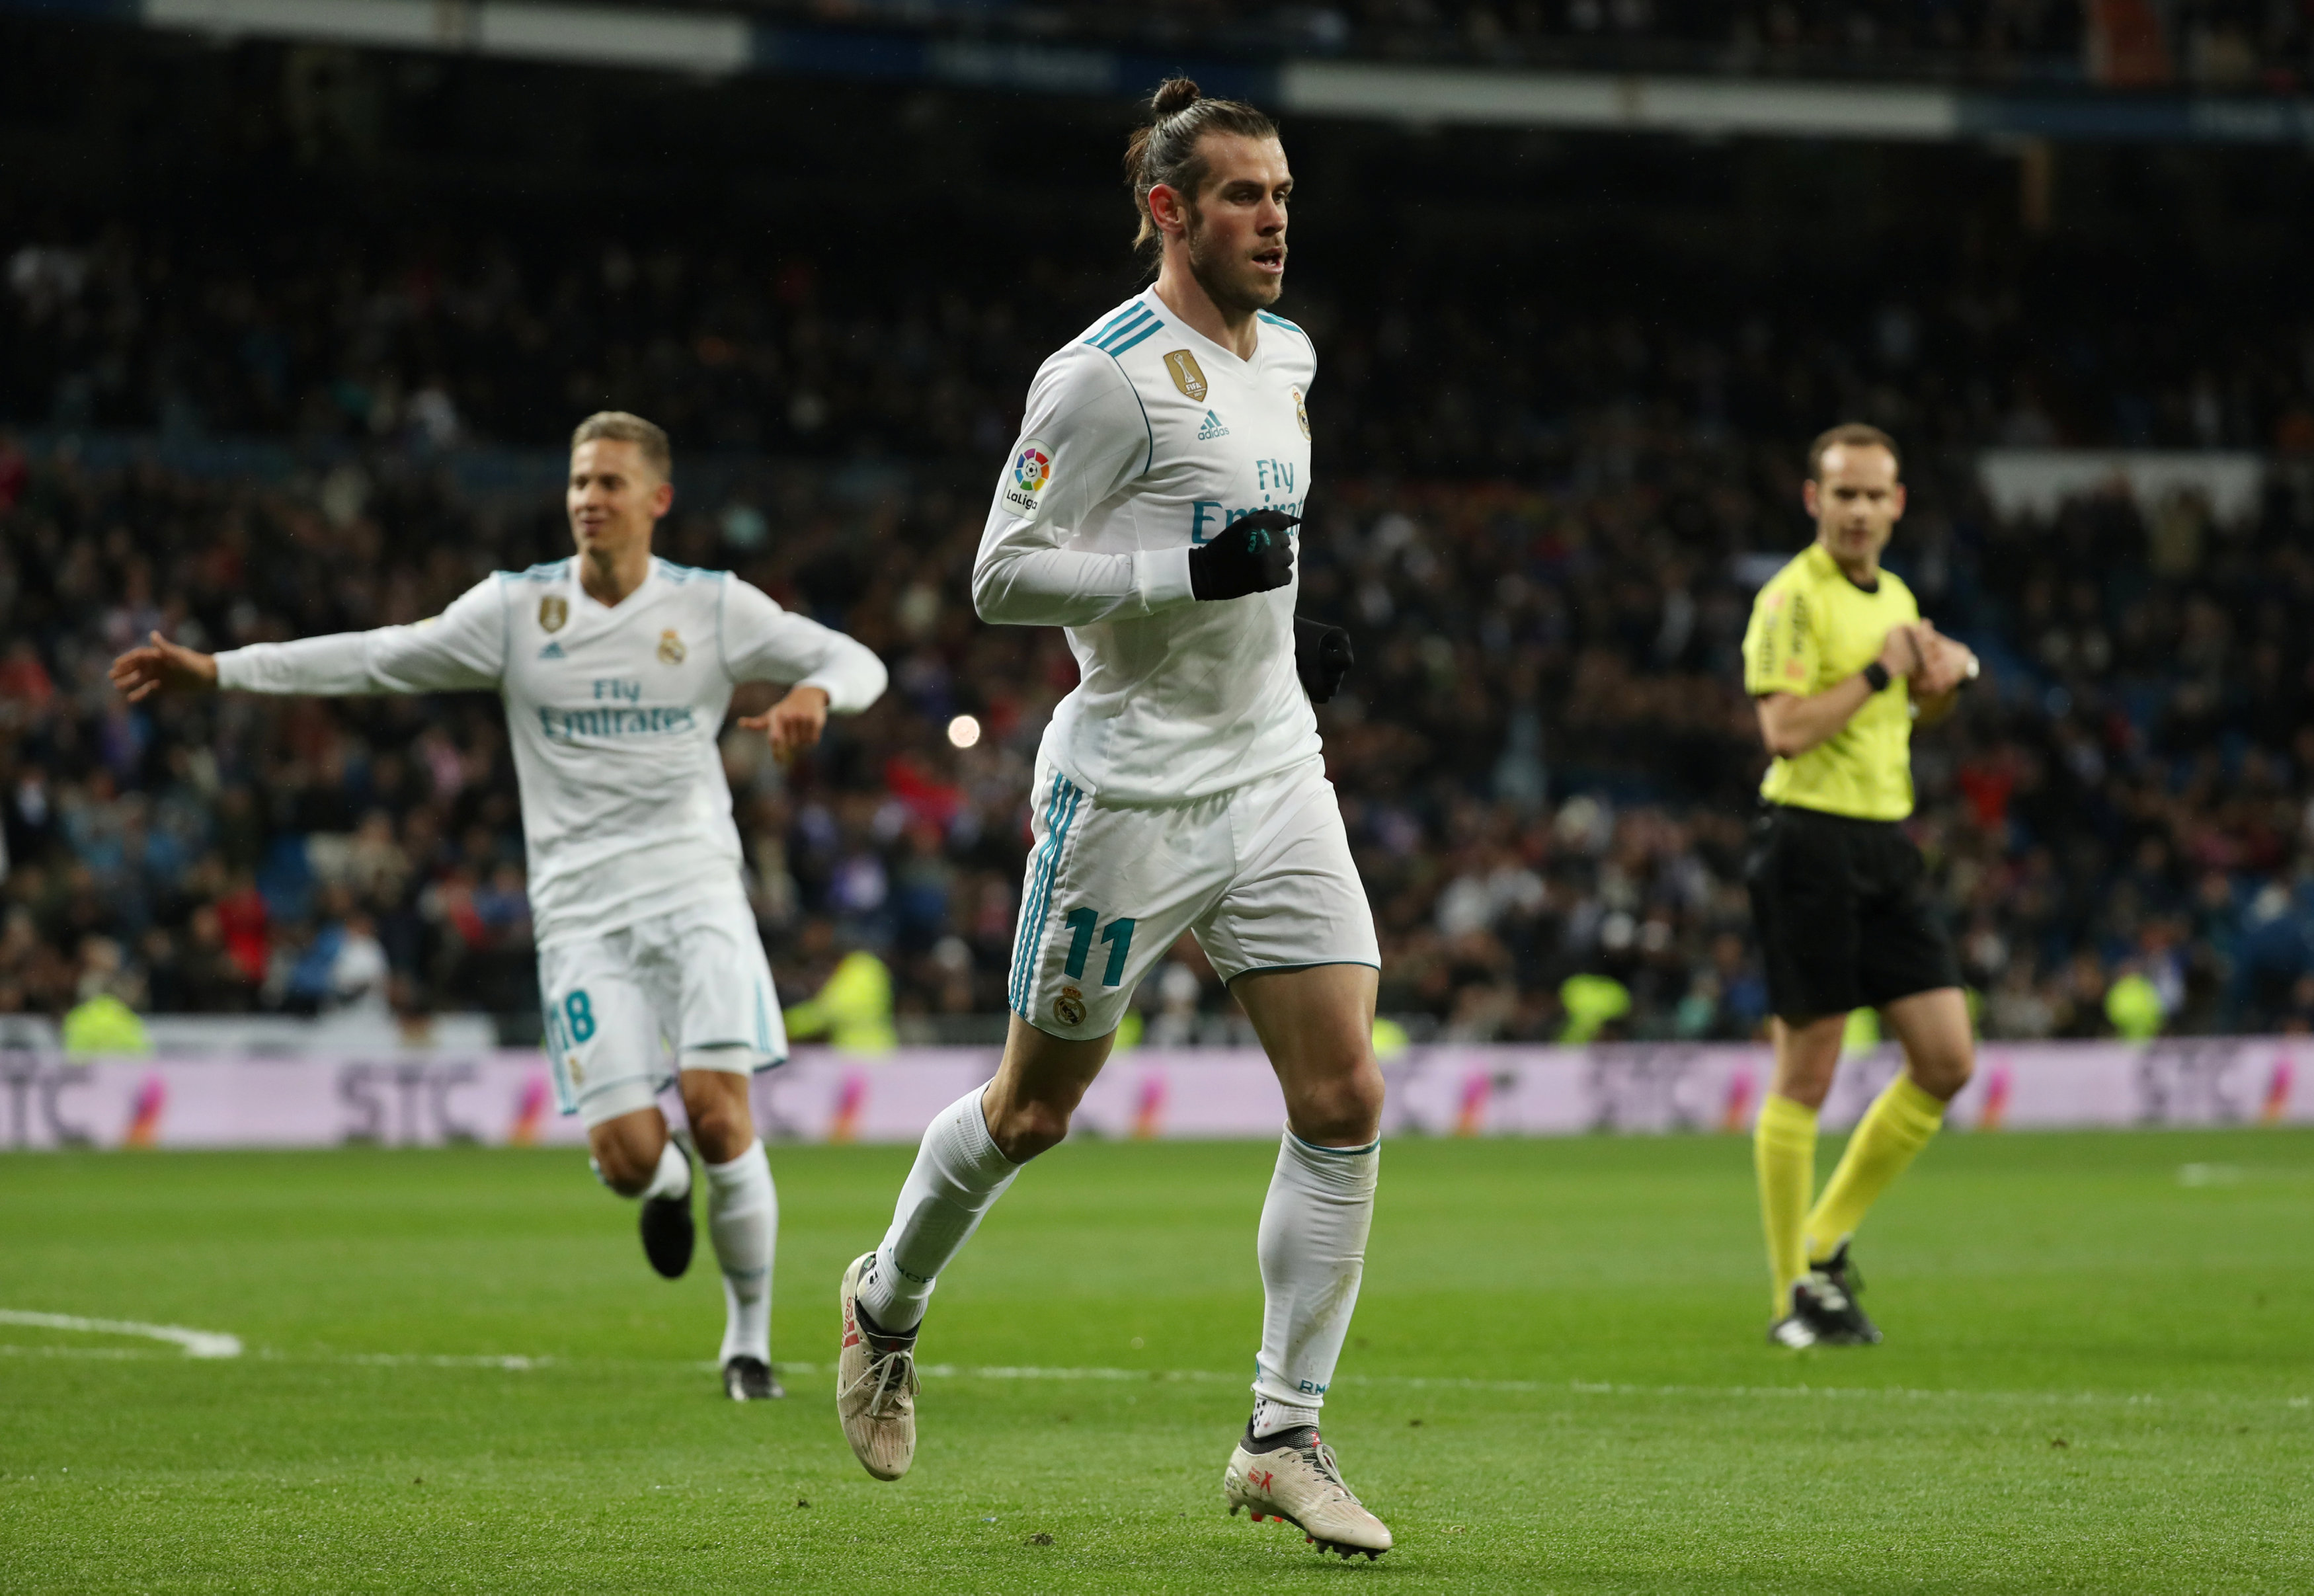 Football: Bale unseats Beckham as Briton with most Liga games